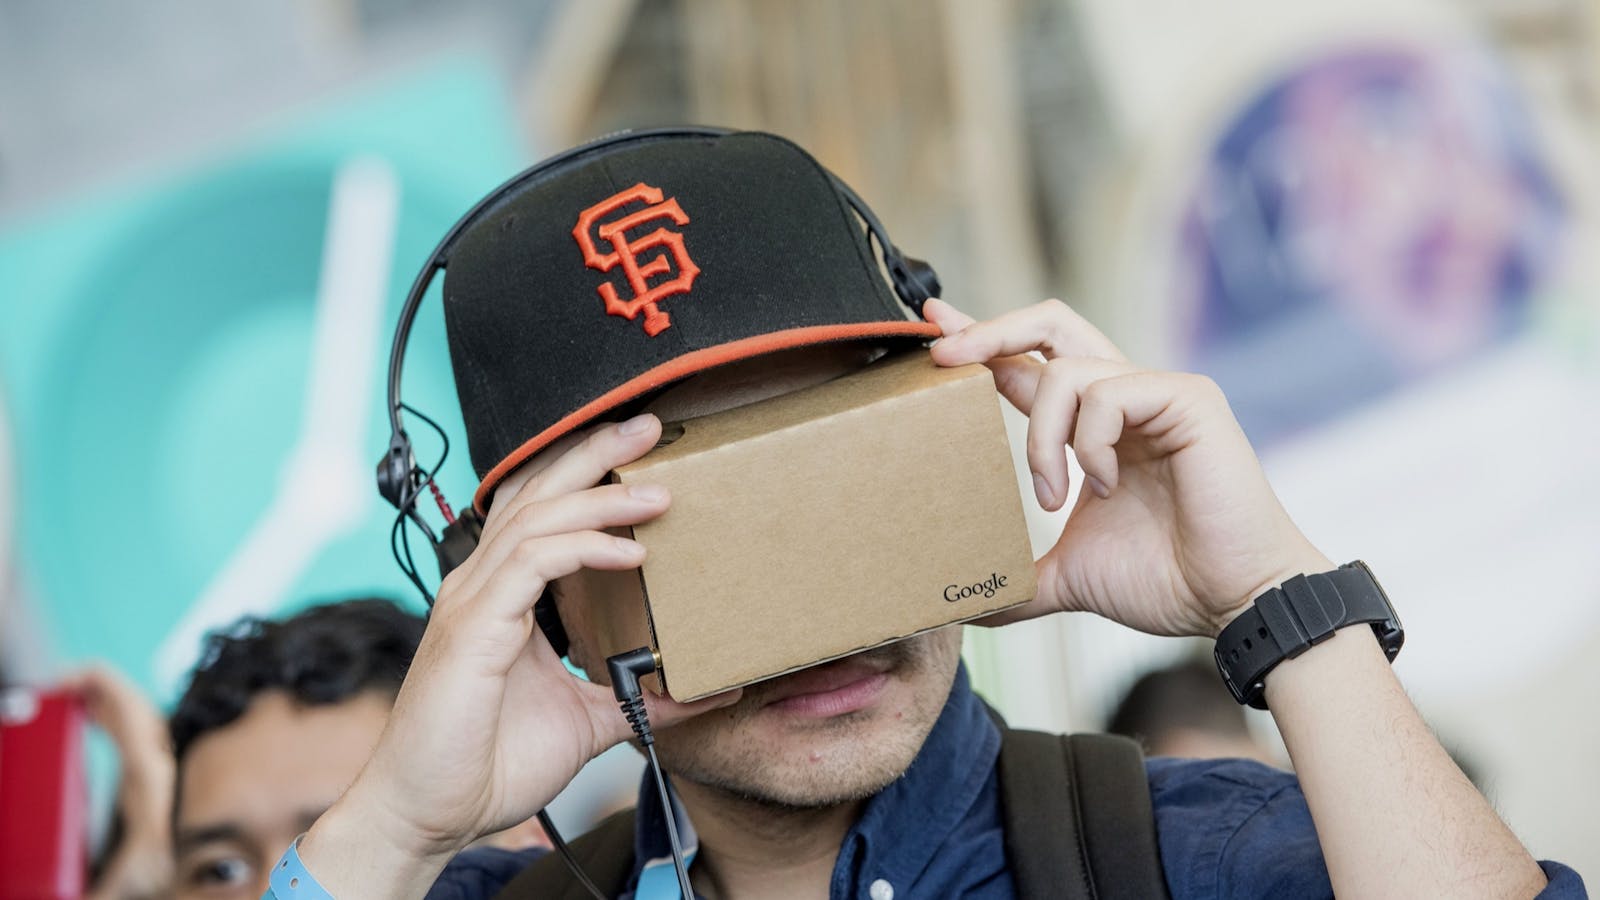 A Google Cardboard VR viewer in 2015. Photo by Bloomberg